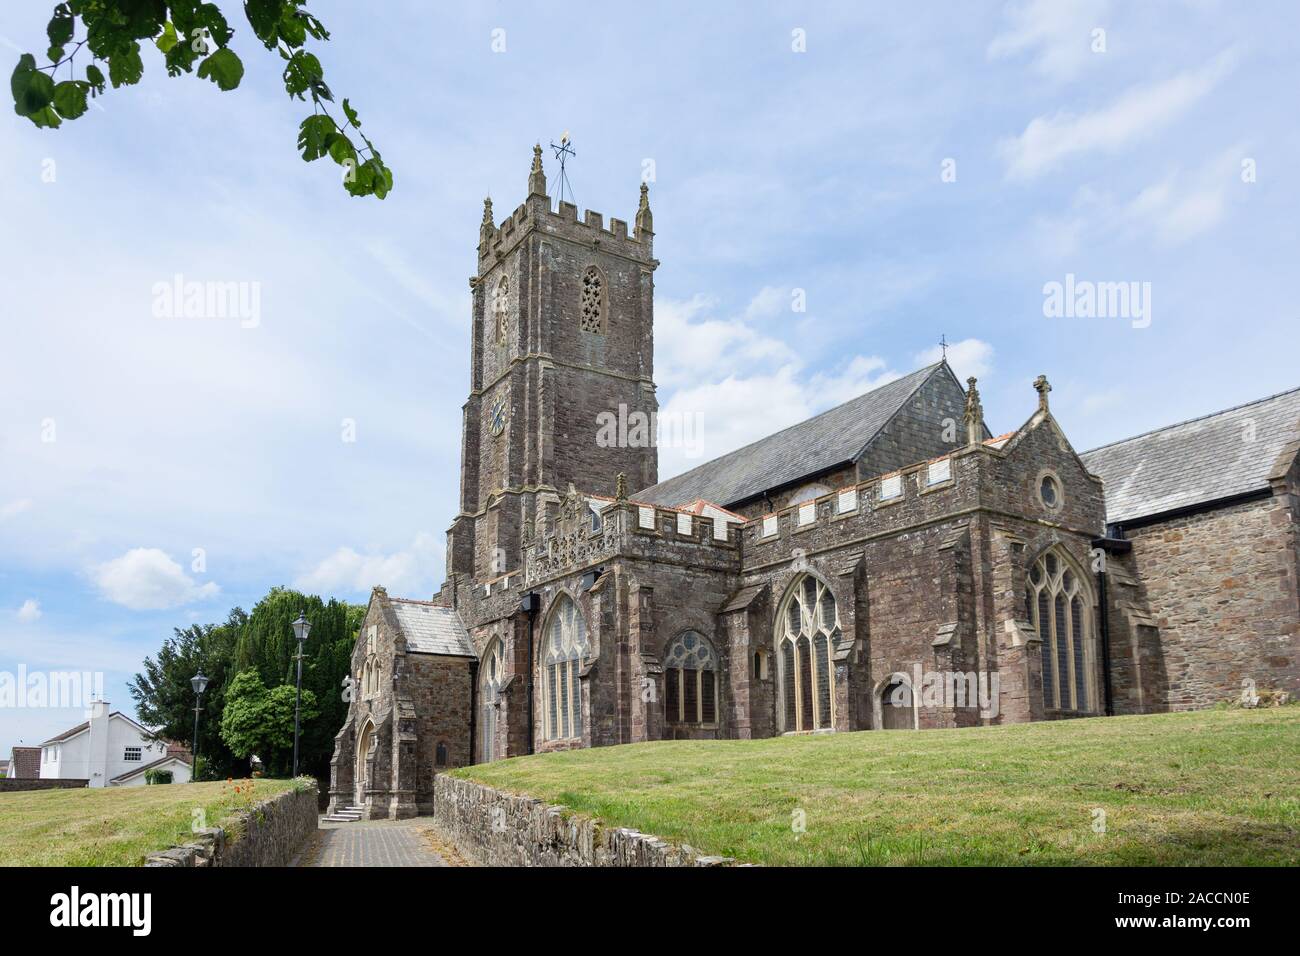 Eglise St Mary Magdalene, North Street, South Molton, Devon, Angleterre, Royaume-Uni Banque D'Images